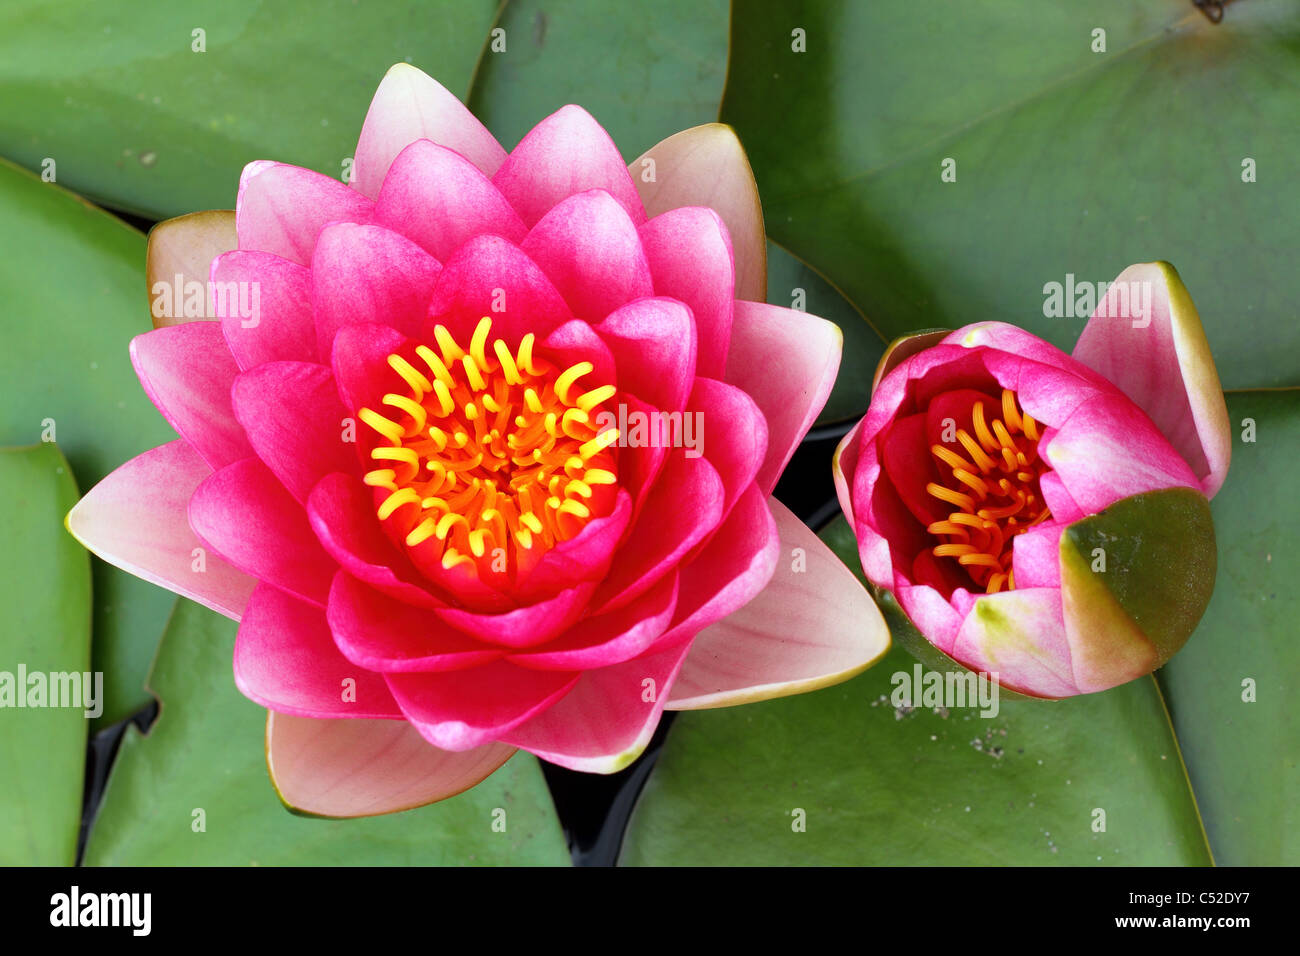 Pink water lily flower and bud close up Nymphea Stock Photo